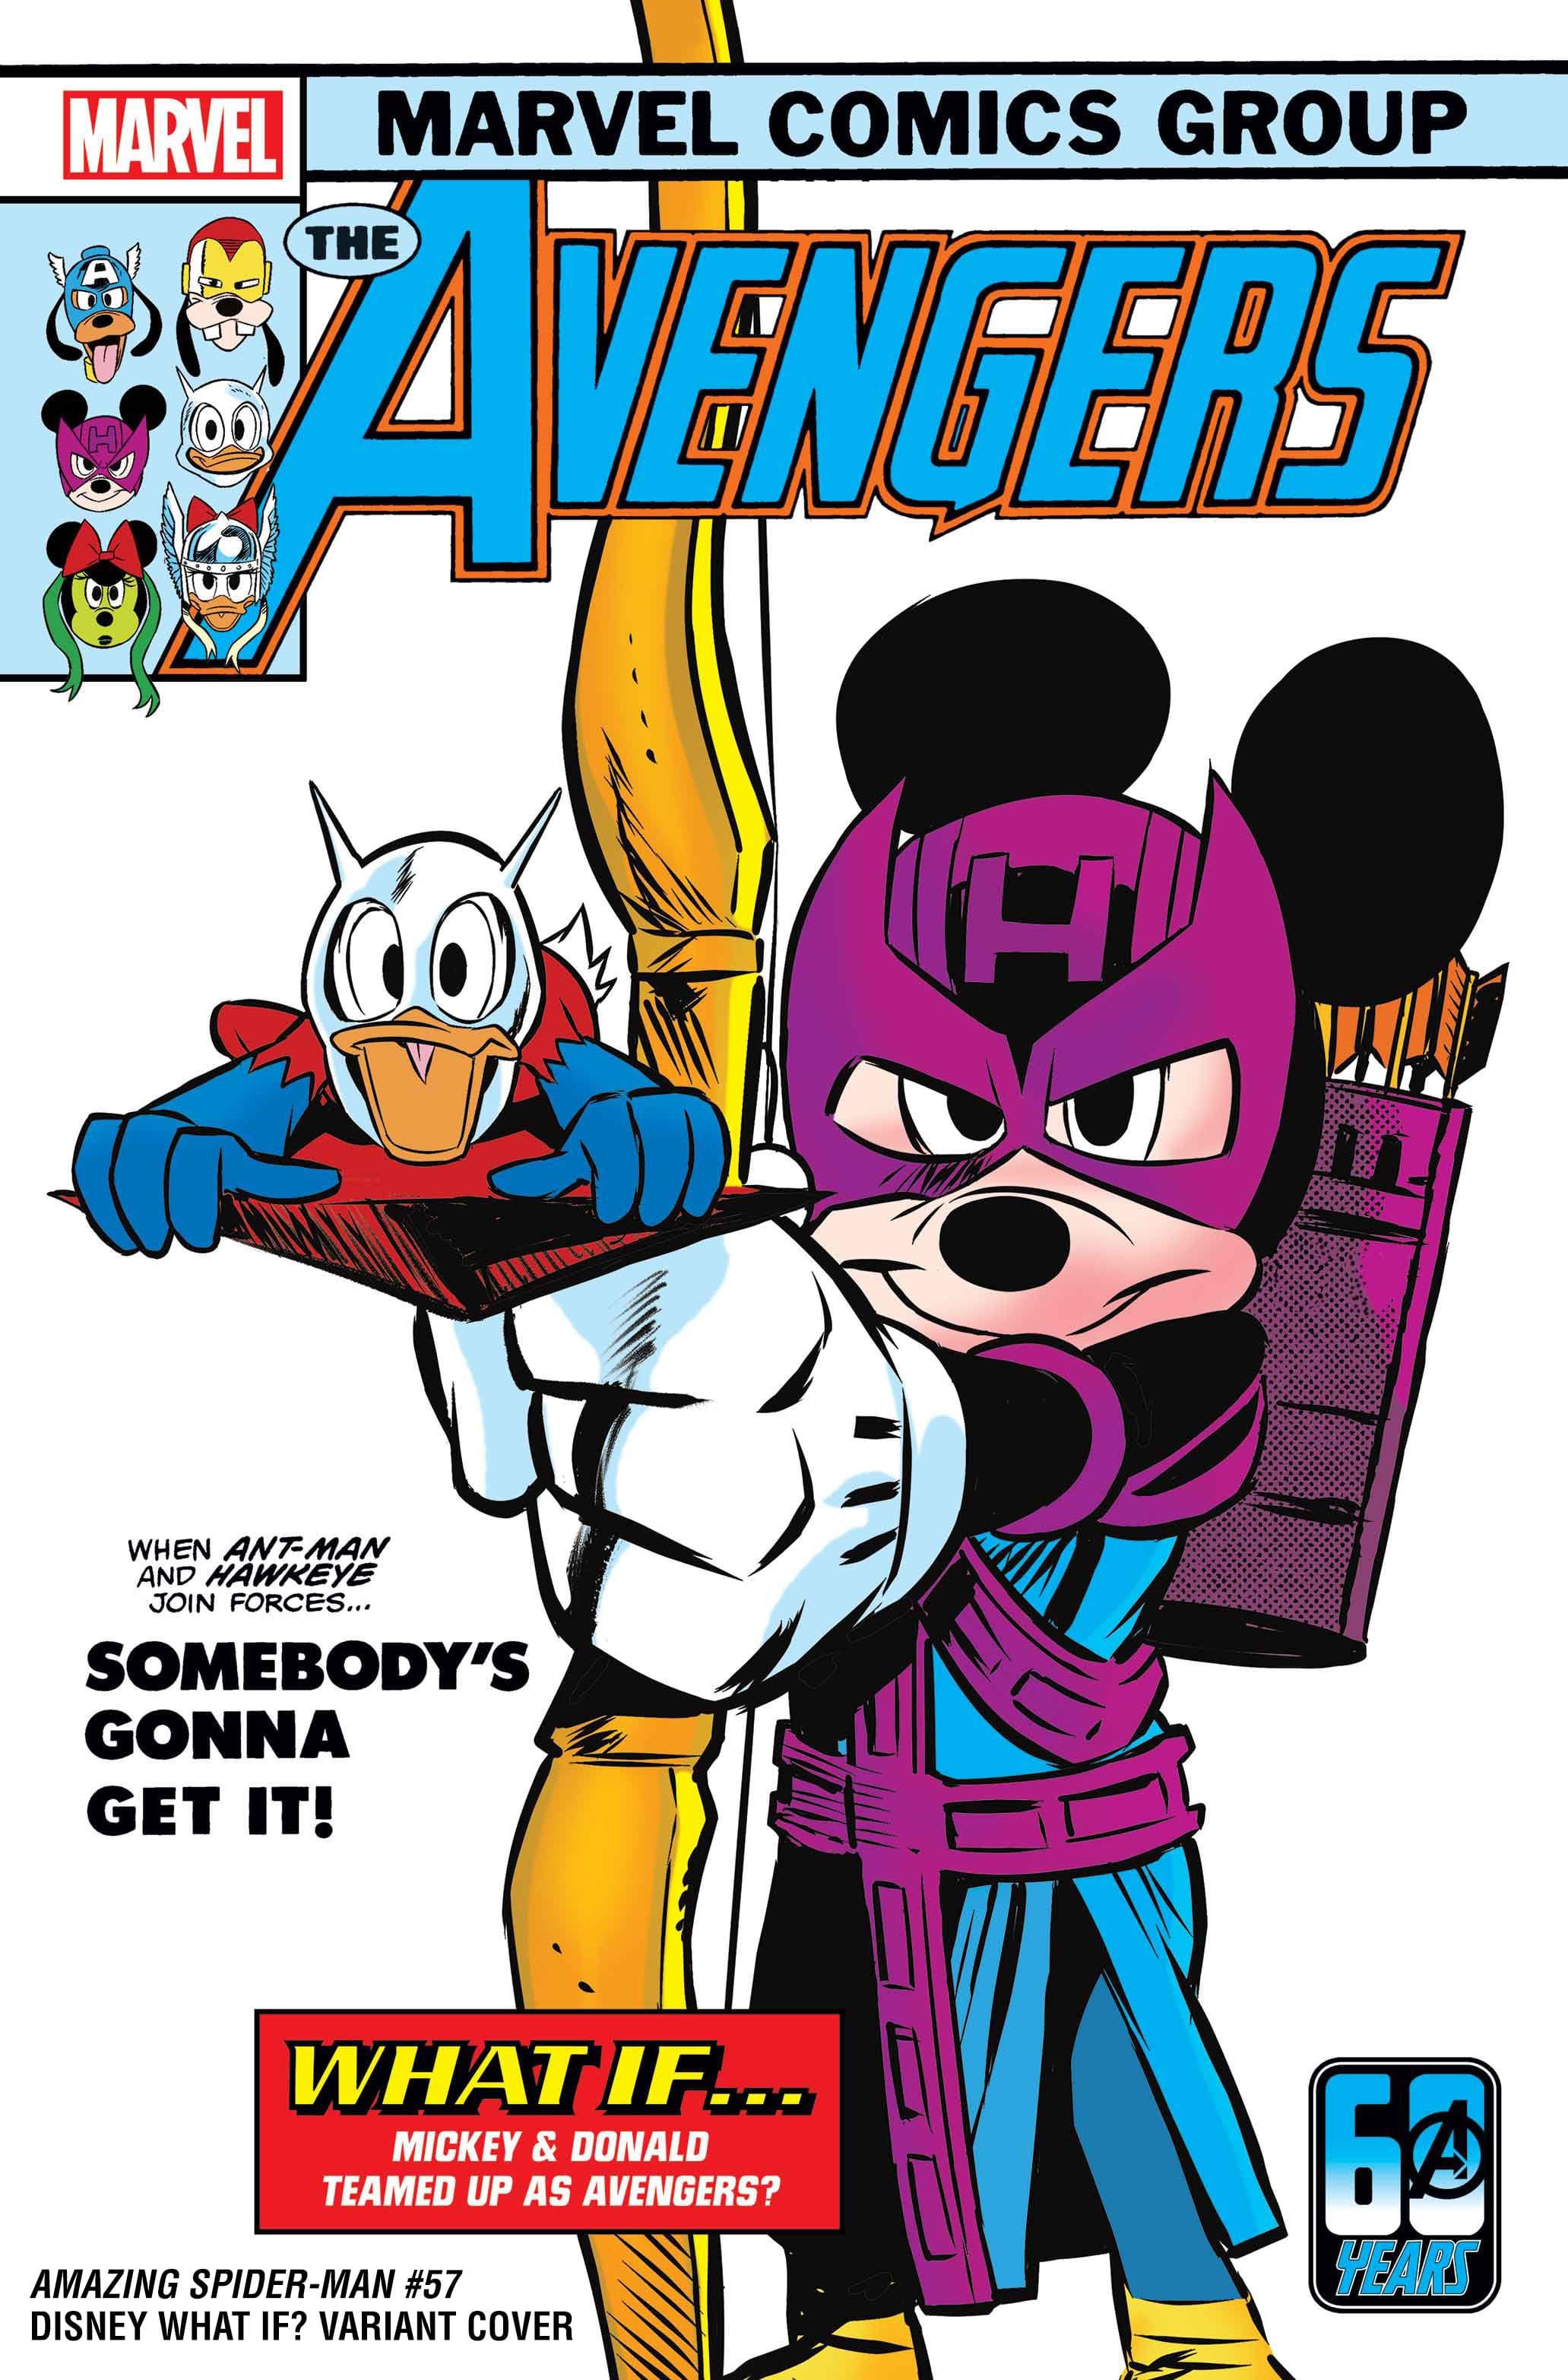 Avengers’ Hawkeye & Ant-Man Get Hilariously Perfect Donald Duck and Mickey Mouse Redesign